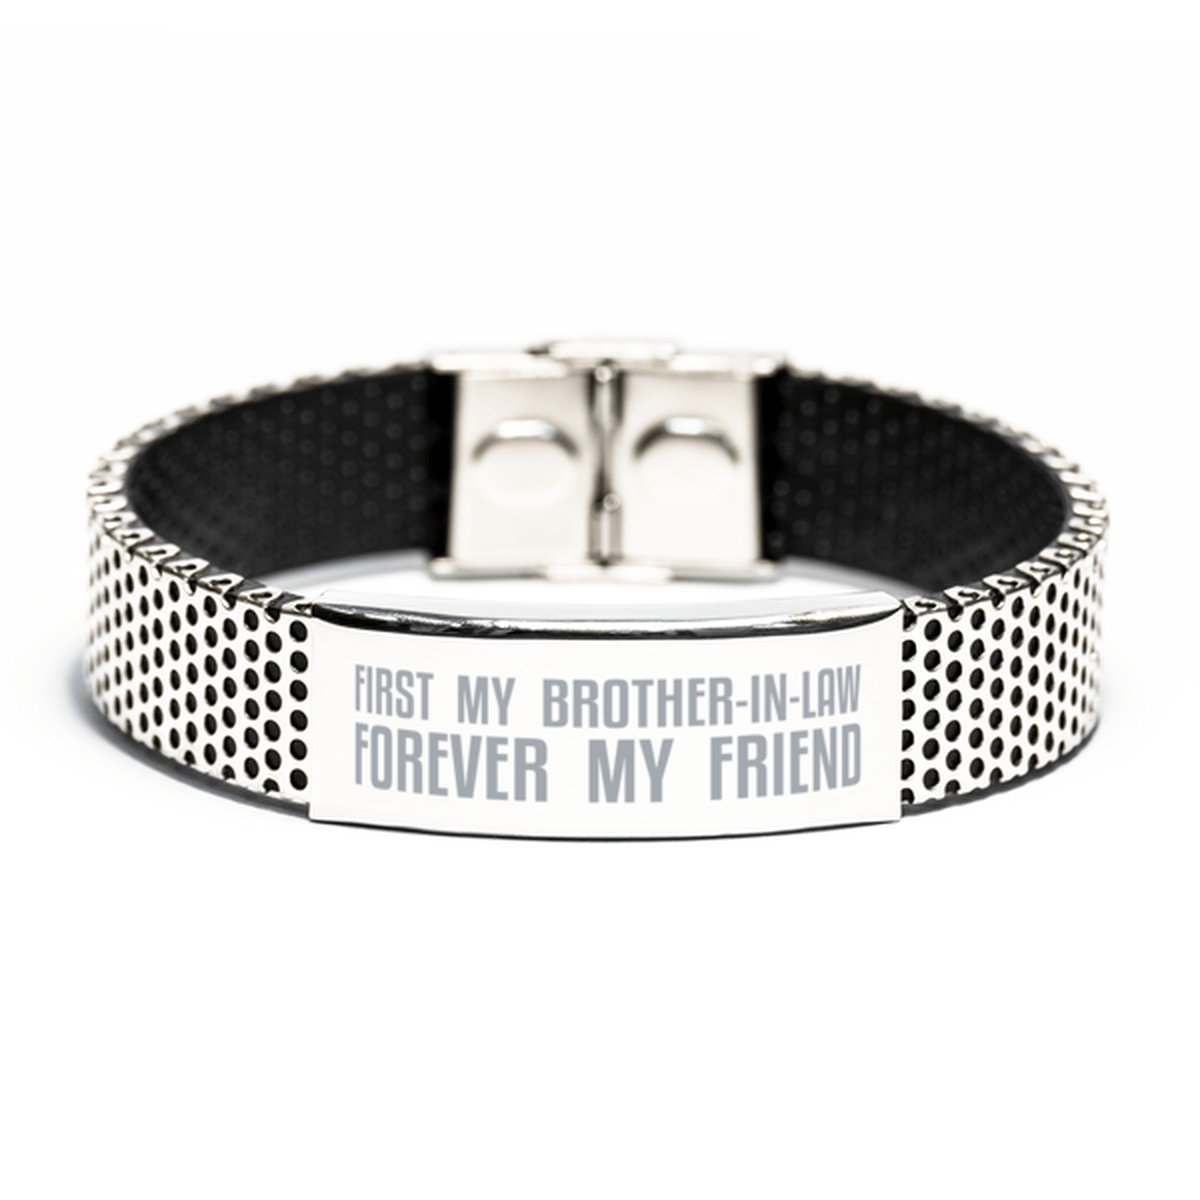 Unique Brother-in-law Stainless Steel Bracelet, First My Brother-in-law Forever My Friend, Best Gift for Brother-in-law Birthday, Christmas